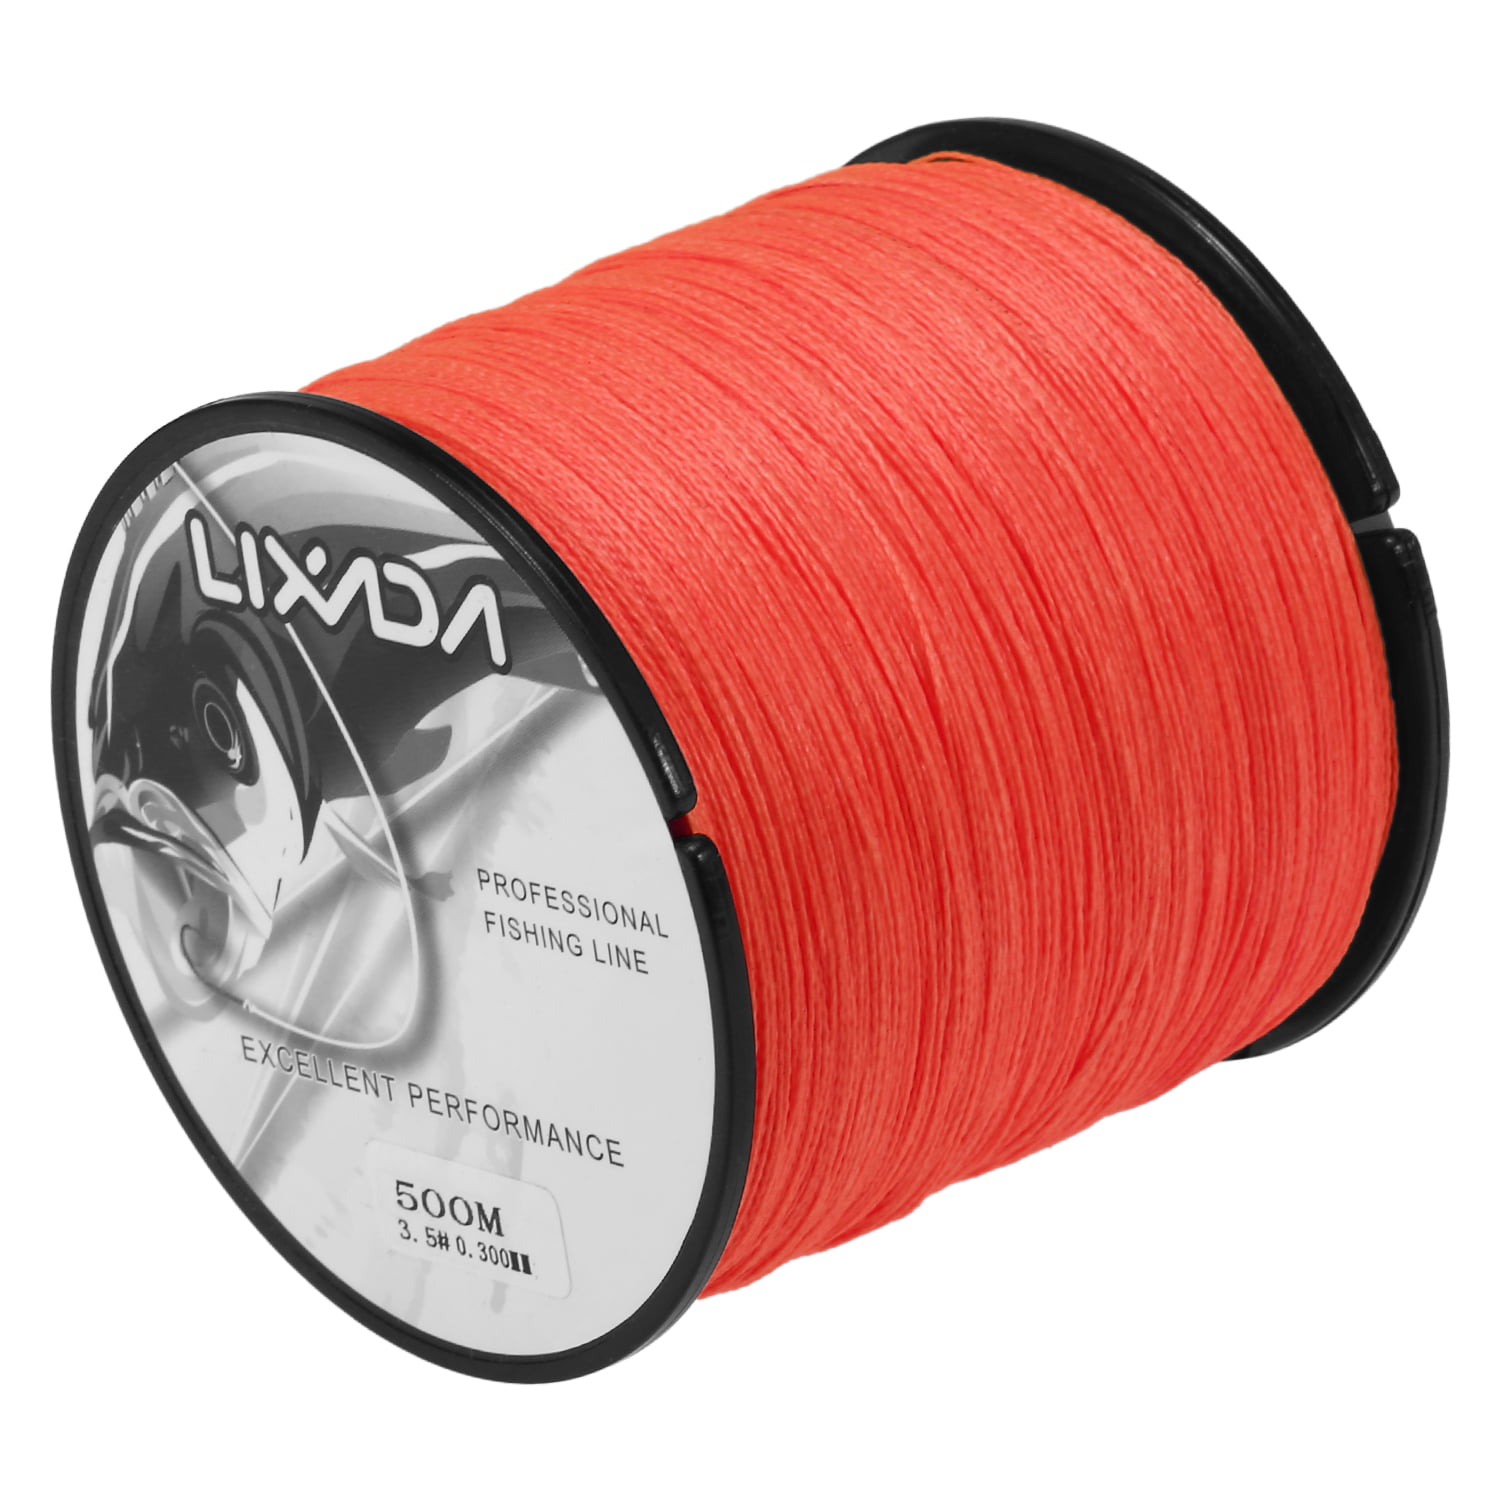 500M Braided Fishing Line 4 STRANDS Super Strong Saltwater Sea Nylon PE Line 